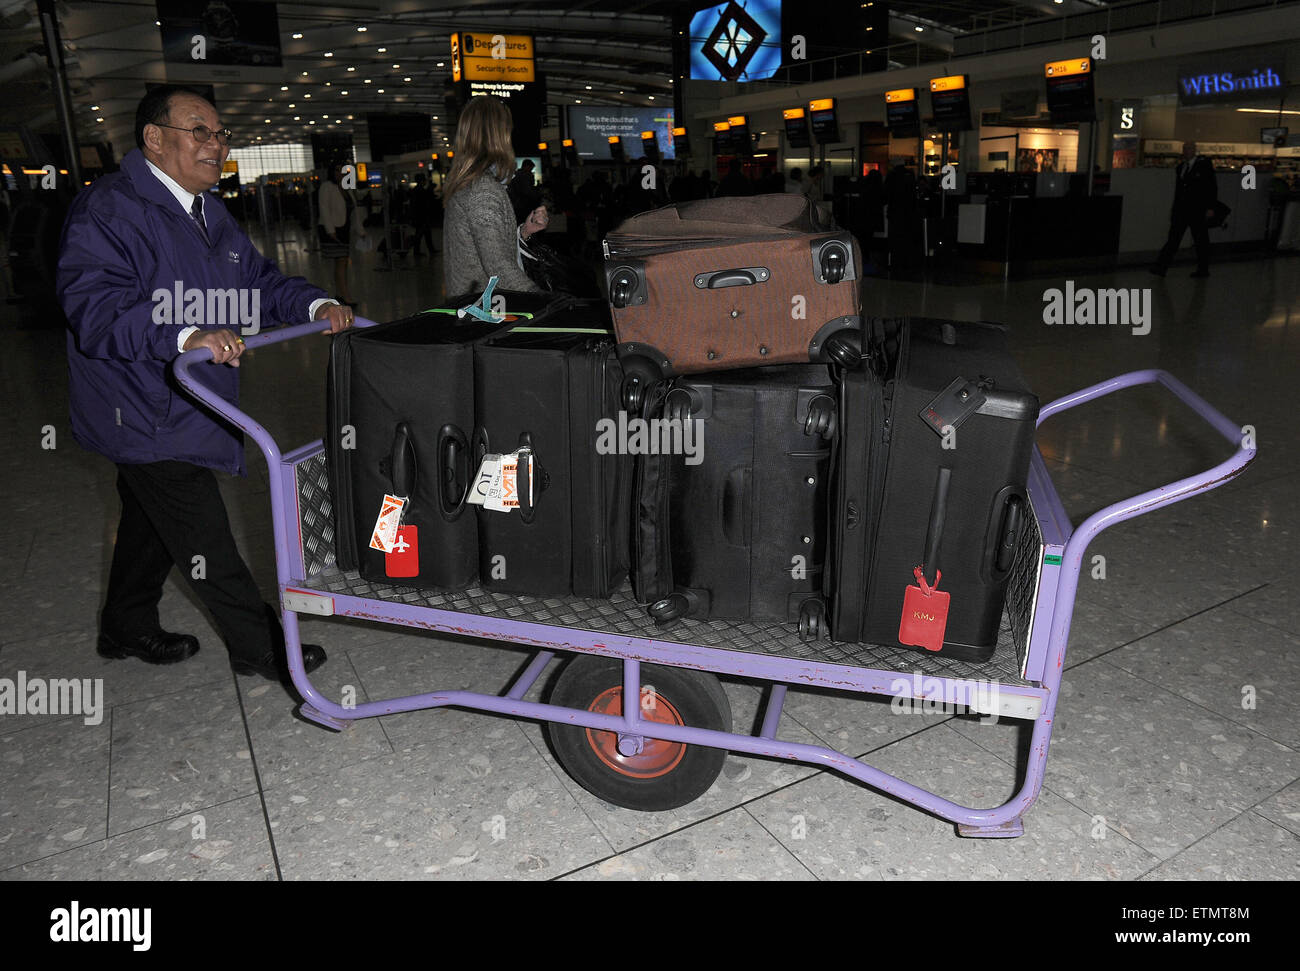 Kylie Jenner jets out of Heathrow Airport, following a promotional visit to  London Featuring: Kylie Jenner, luggage Where: London, United Kingdom When:  15 Mar 2015 Credit: Will Alexander/WENN.com Stock Photo - Alamy